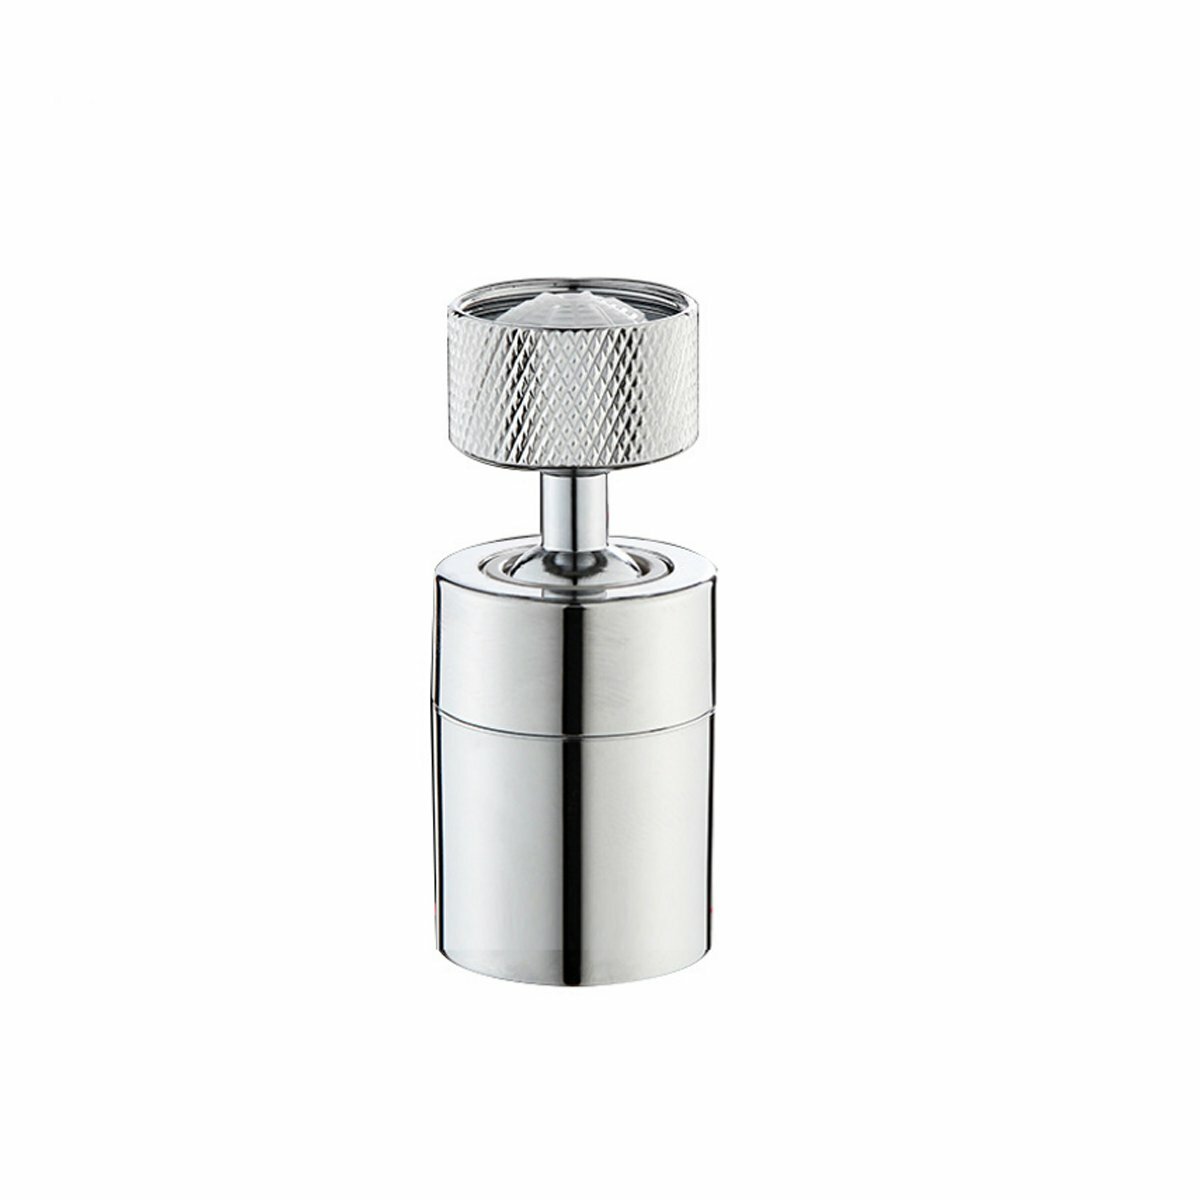 

360° Rotate Universal Splash Filter Faucet Water Outlet Faucet Extender Silver